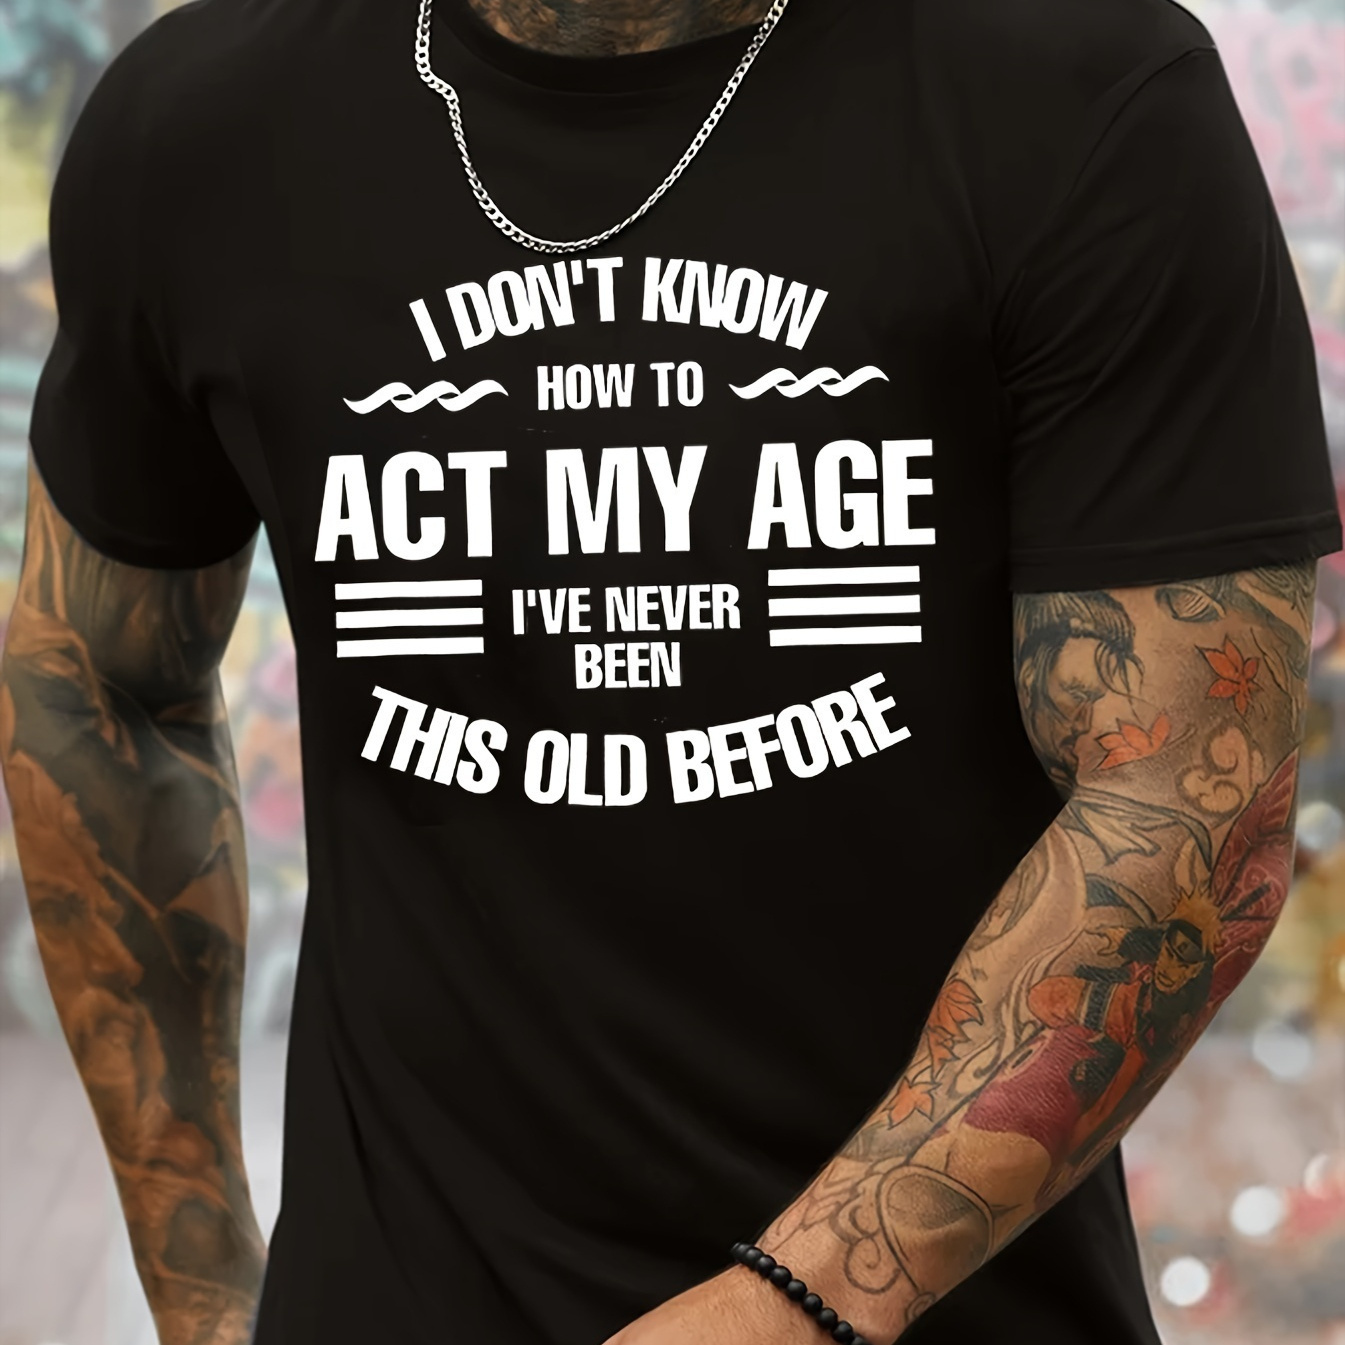 

1 Pc, 100% Cotton T-shirt, I Don't Know How To Act My Age... Print, Men's Novel Graphic Design T-shirt, Casual Comfy Tees For Summer, Men's Clothing Tops For Daily Activities